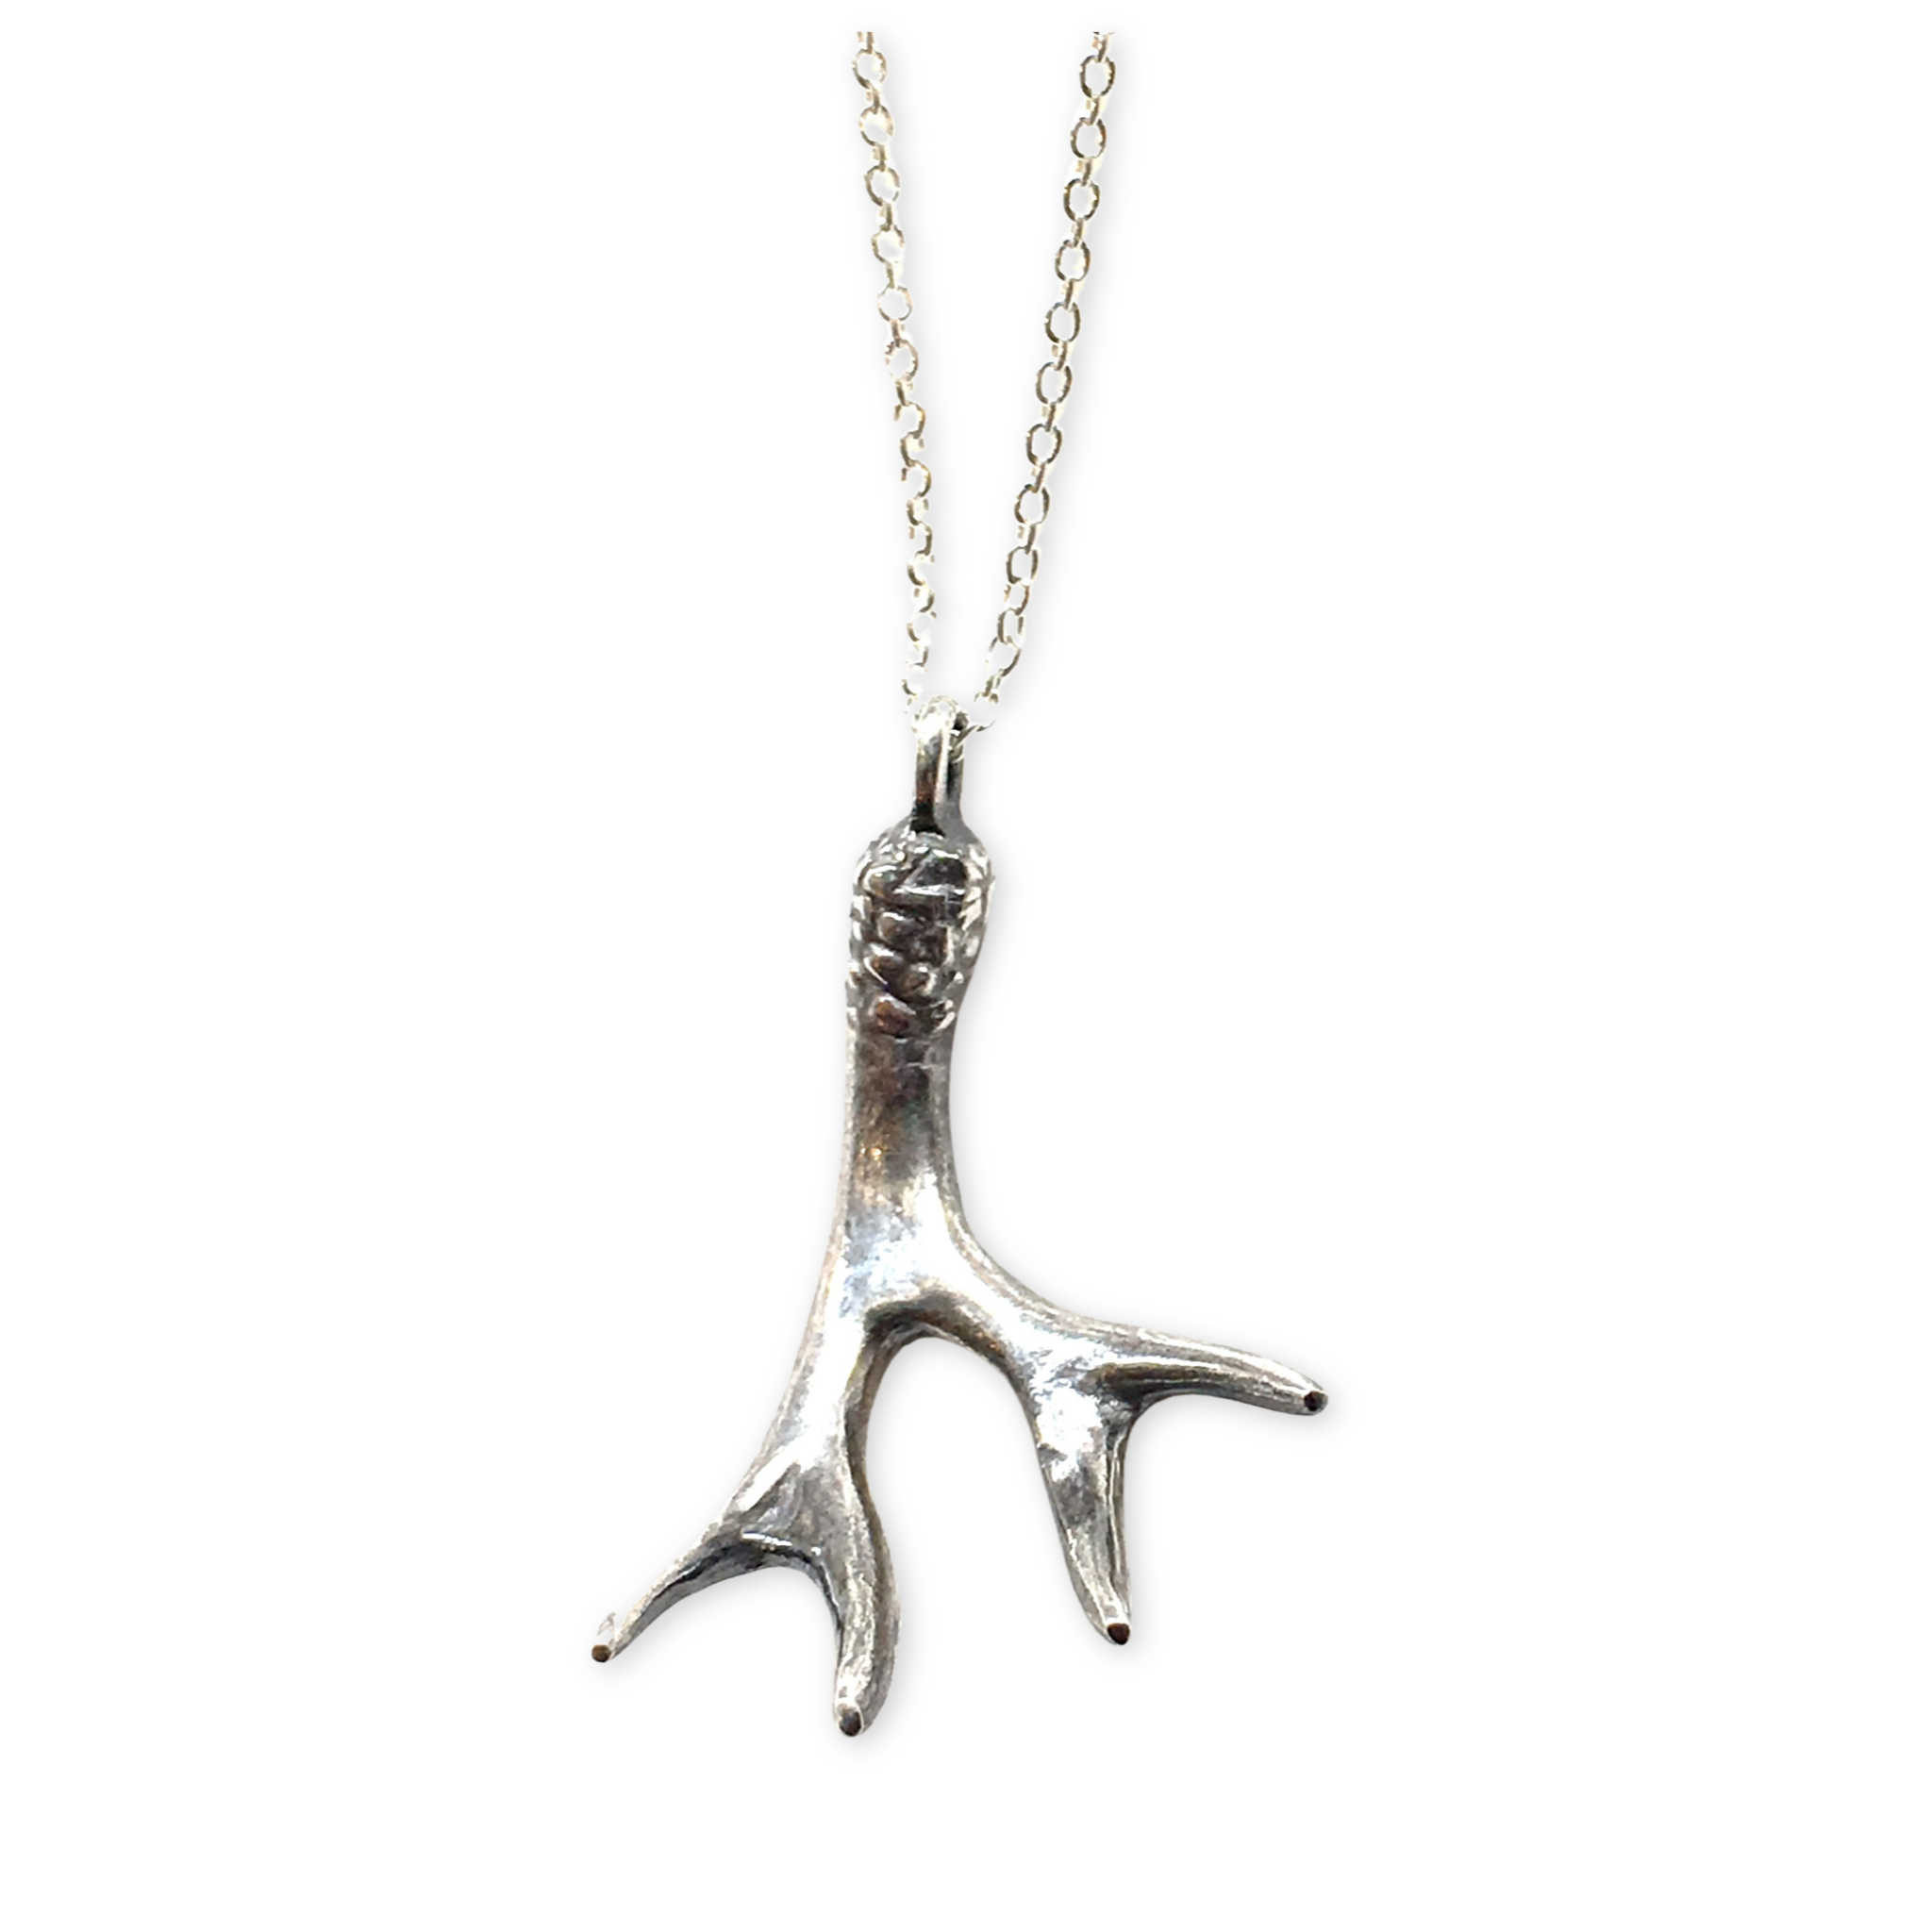 silver chain with a deer antler pendant 